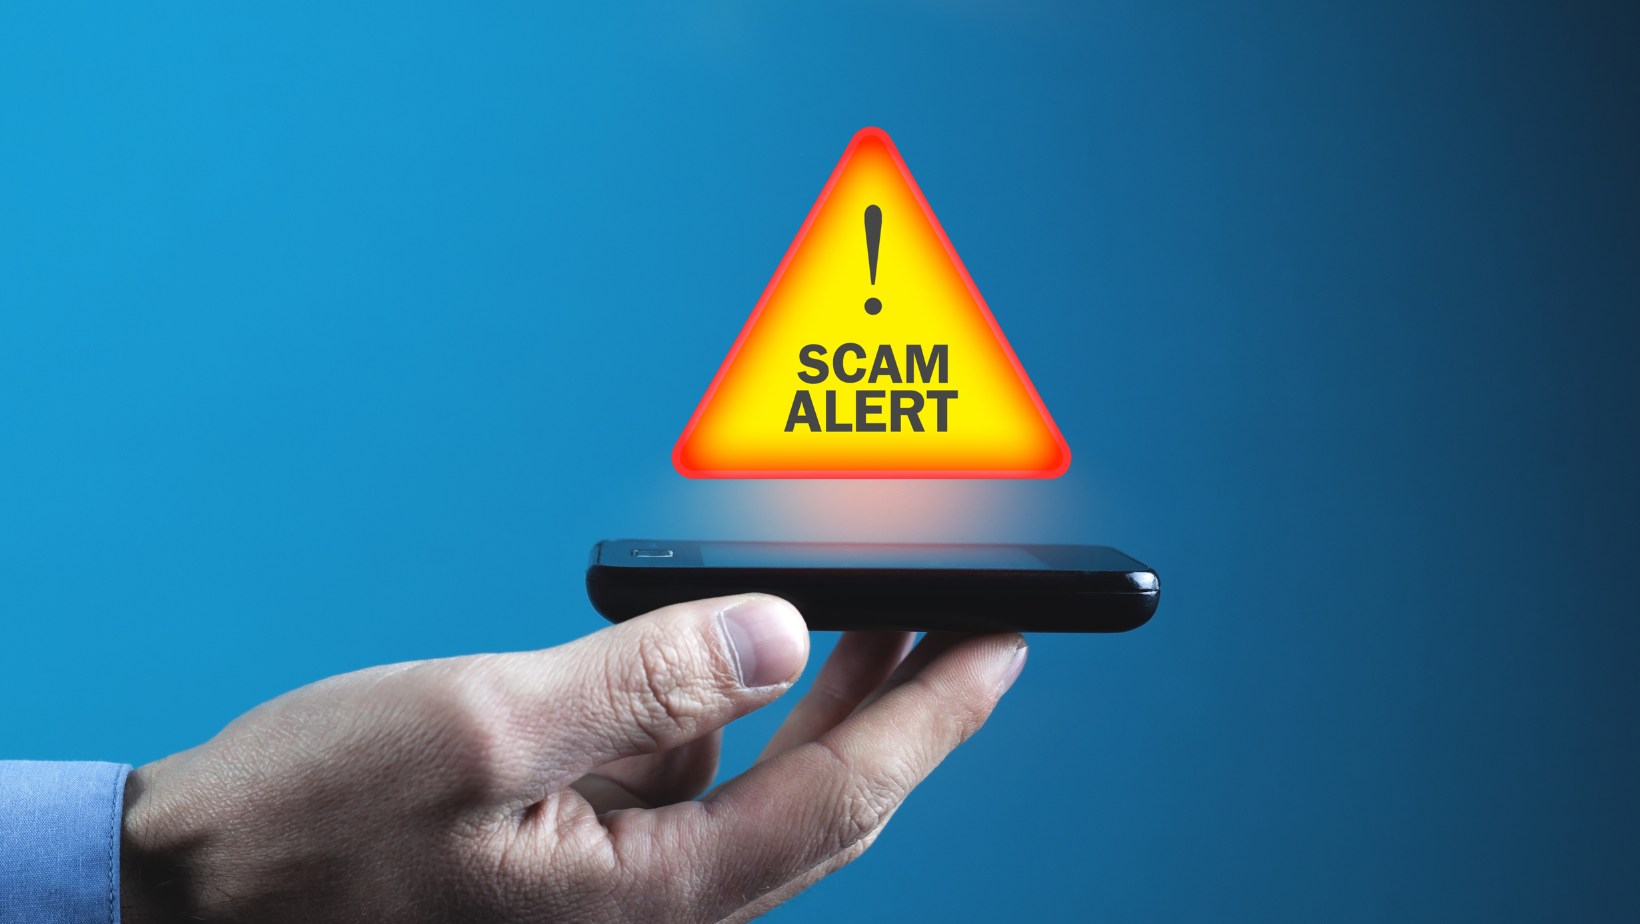 A mobile phone showing a scam alert